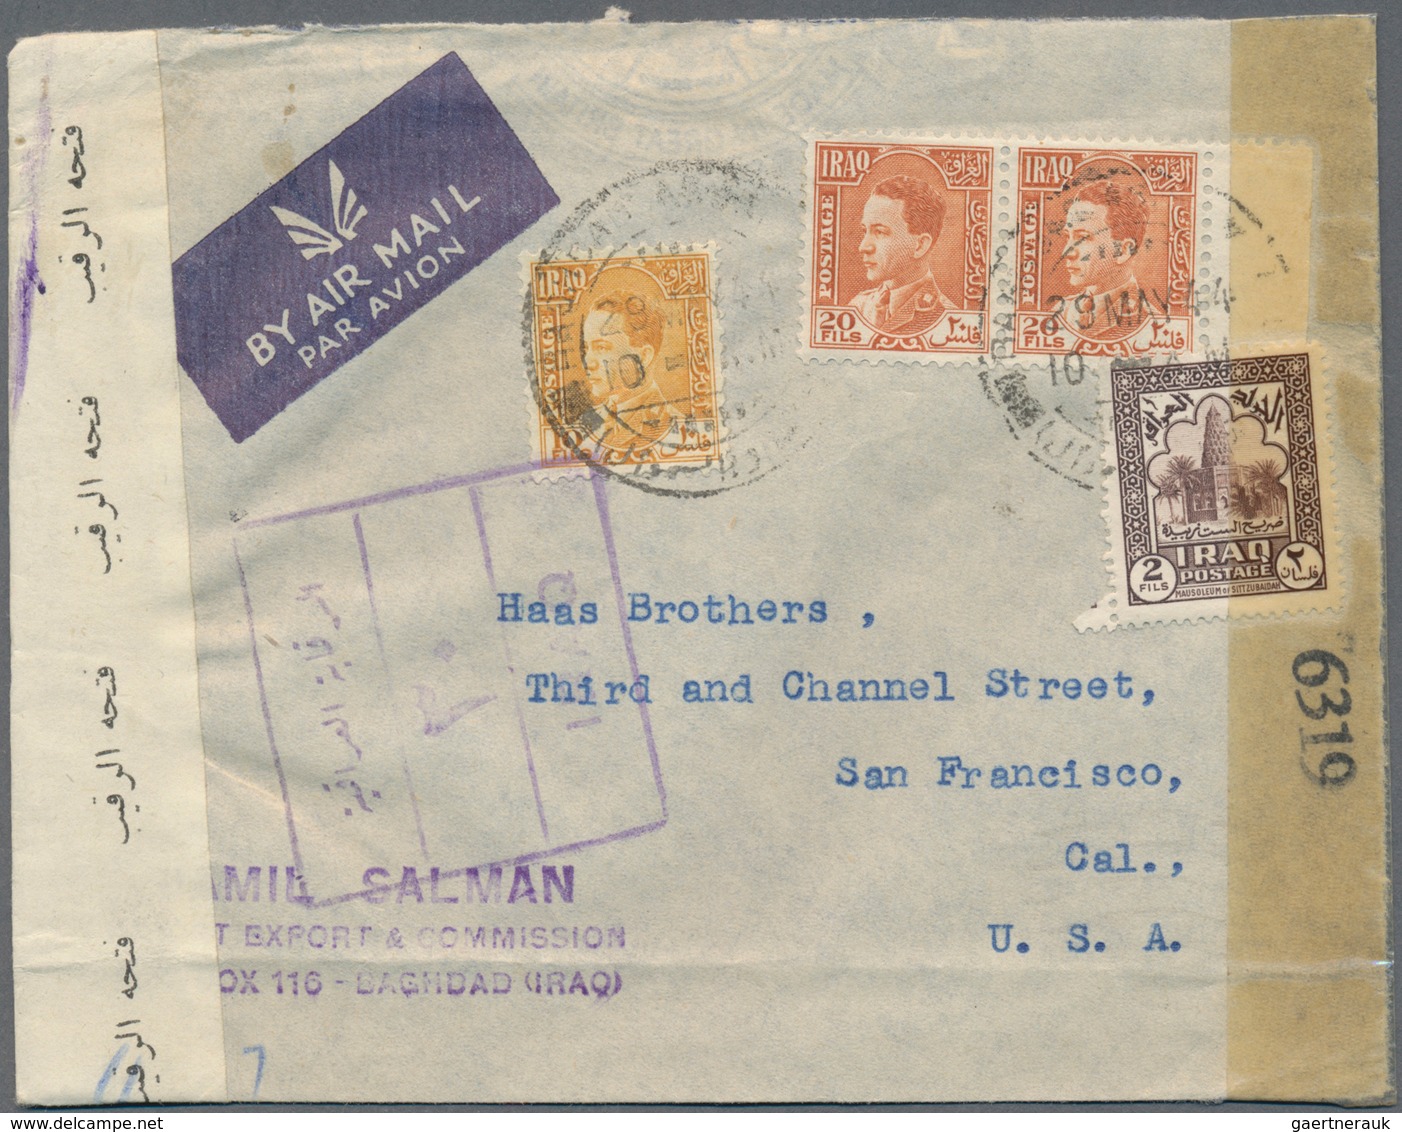 Asien: 1929/81, Near East: Covers/ Mint And Used Stationery Of Jordan (28), Syria (33) And Iraq (17) - Asia (Other)